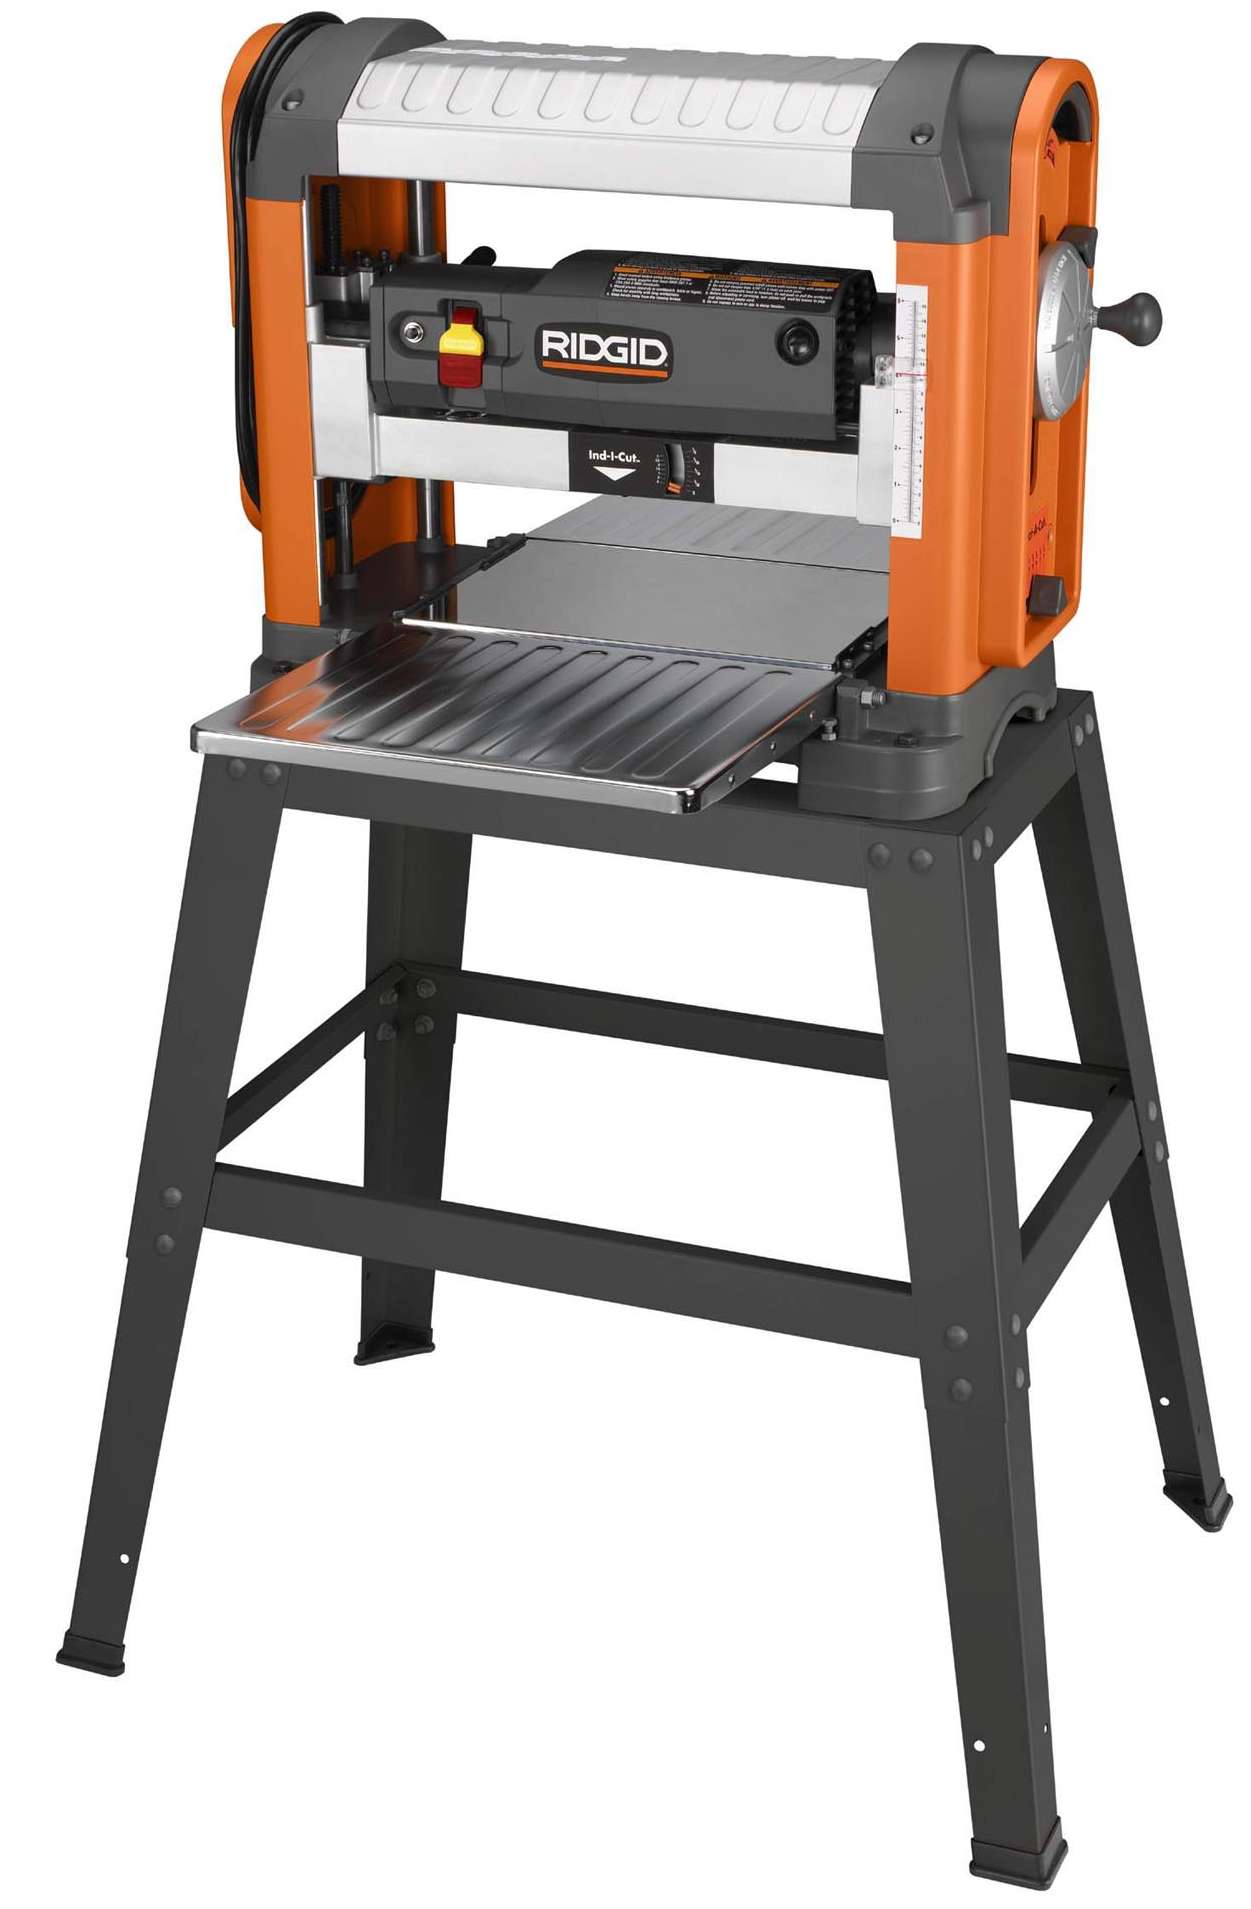 king kc 13hpc helical planer - Canadian Woodworking and 